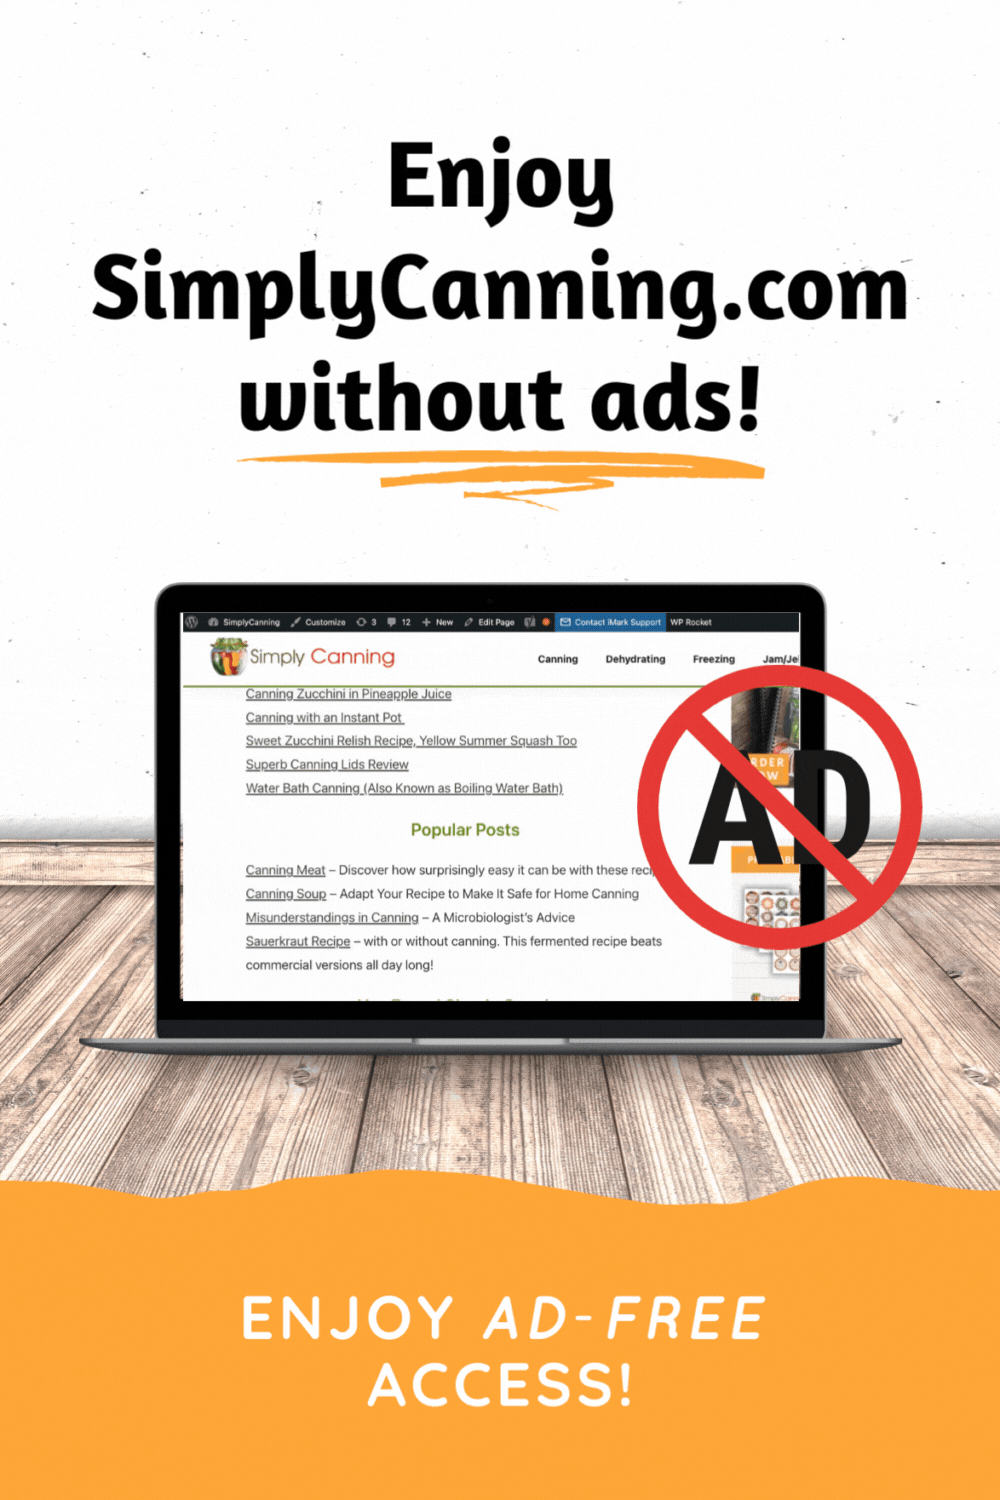 Enjoy SimplyCanning.com without ads!